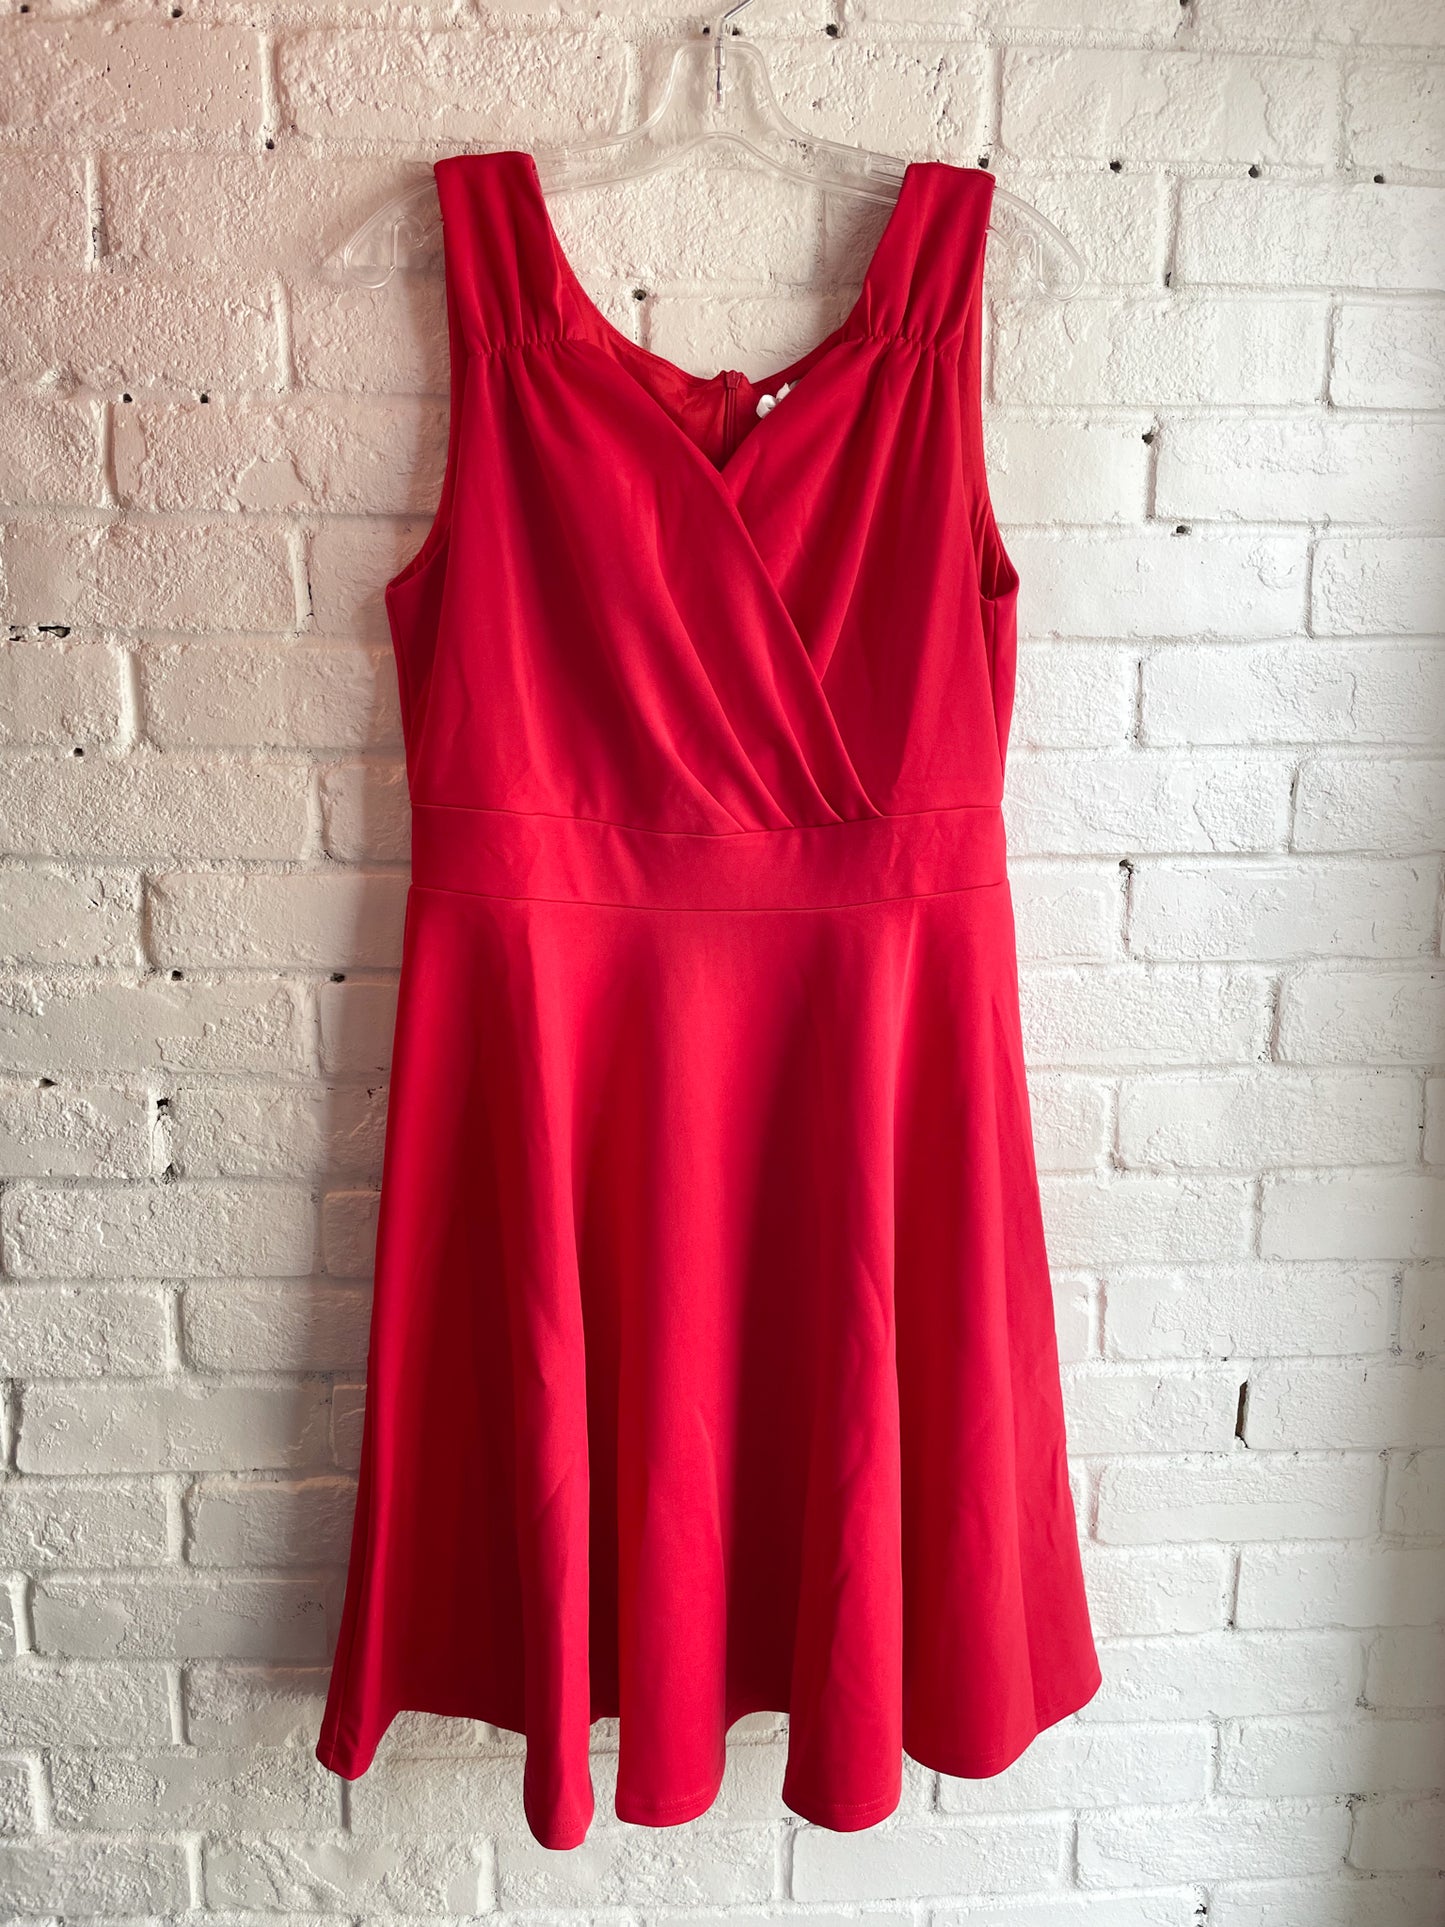 Grace Karin Red Sweetheart Cocktail Party Fit Flare Dress - Large